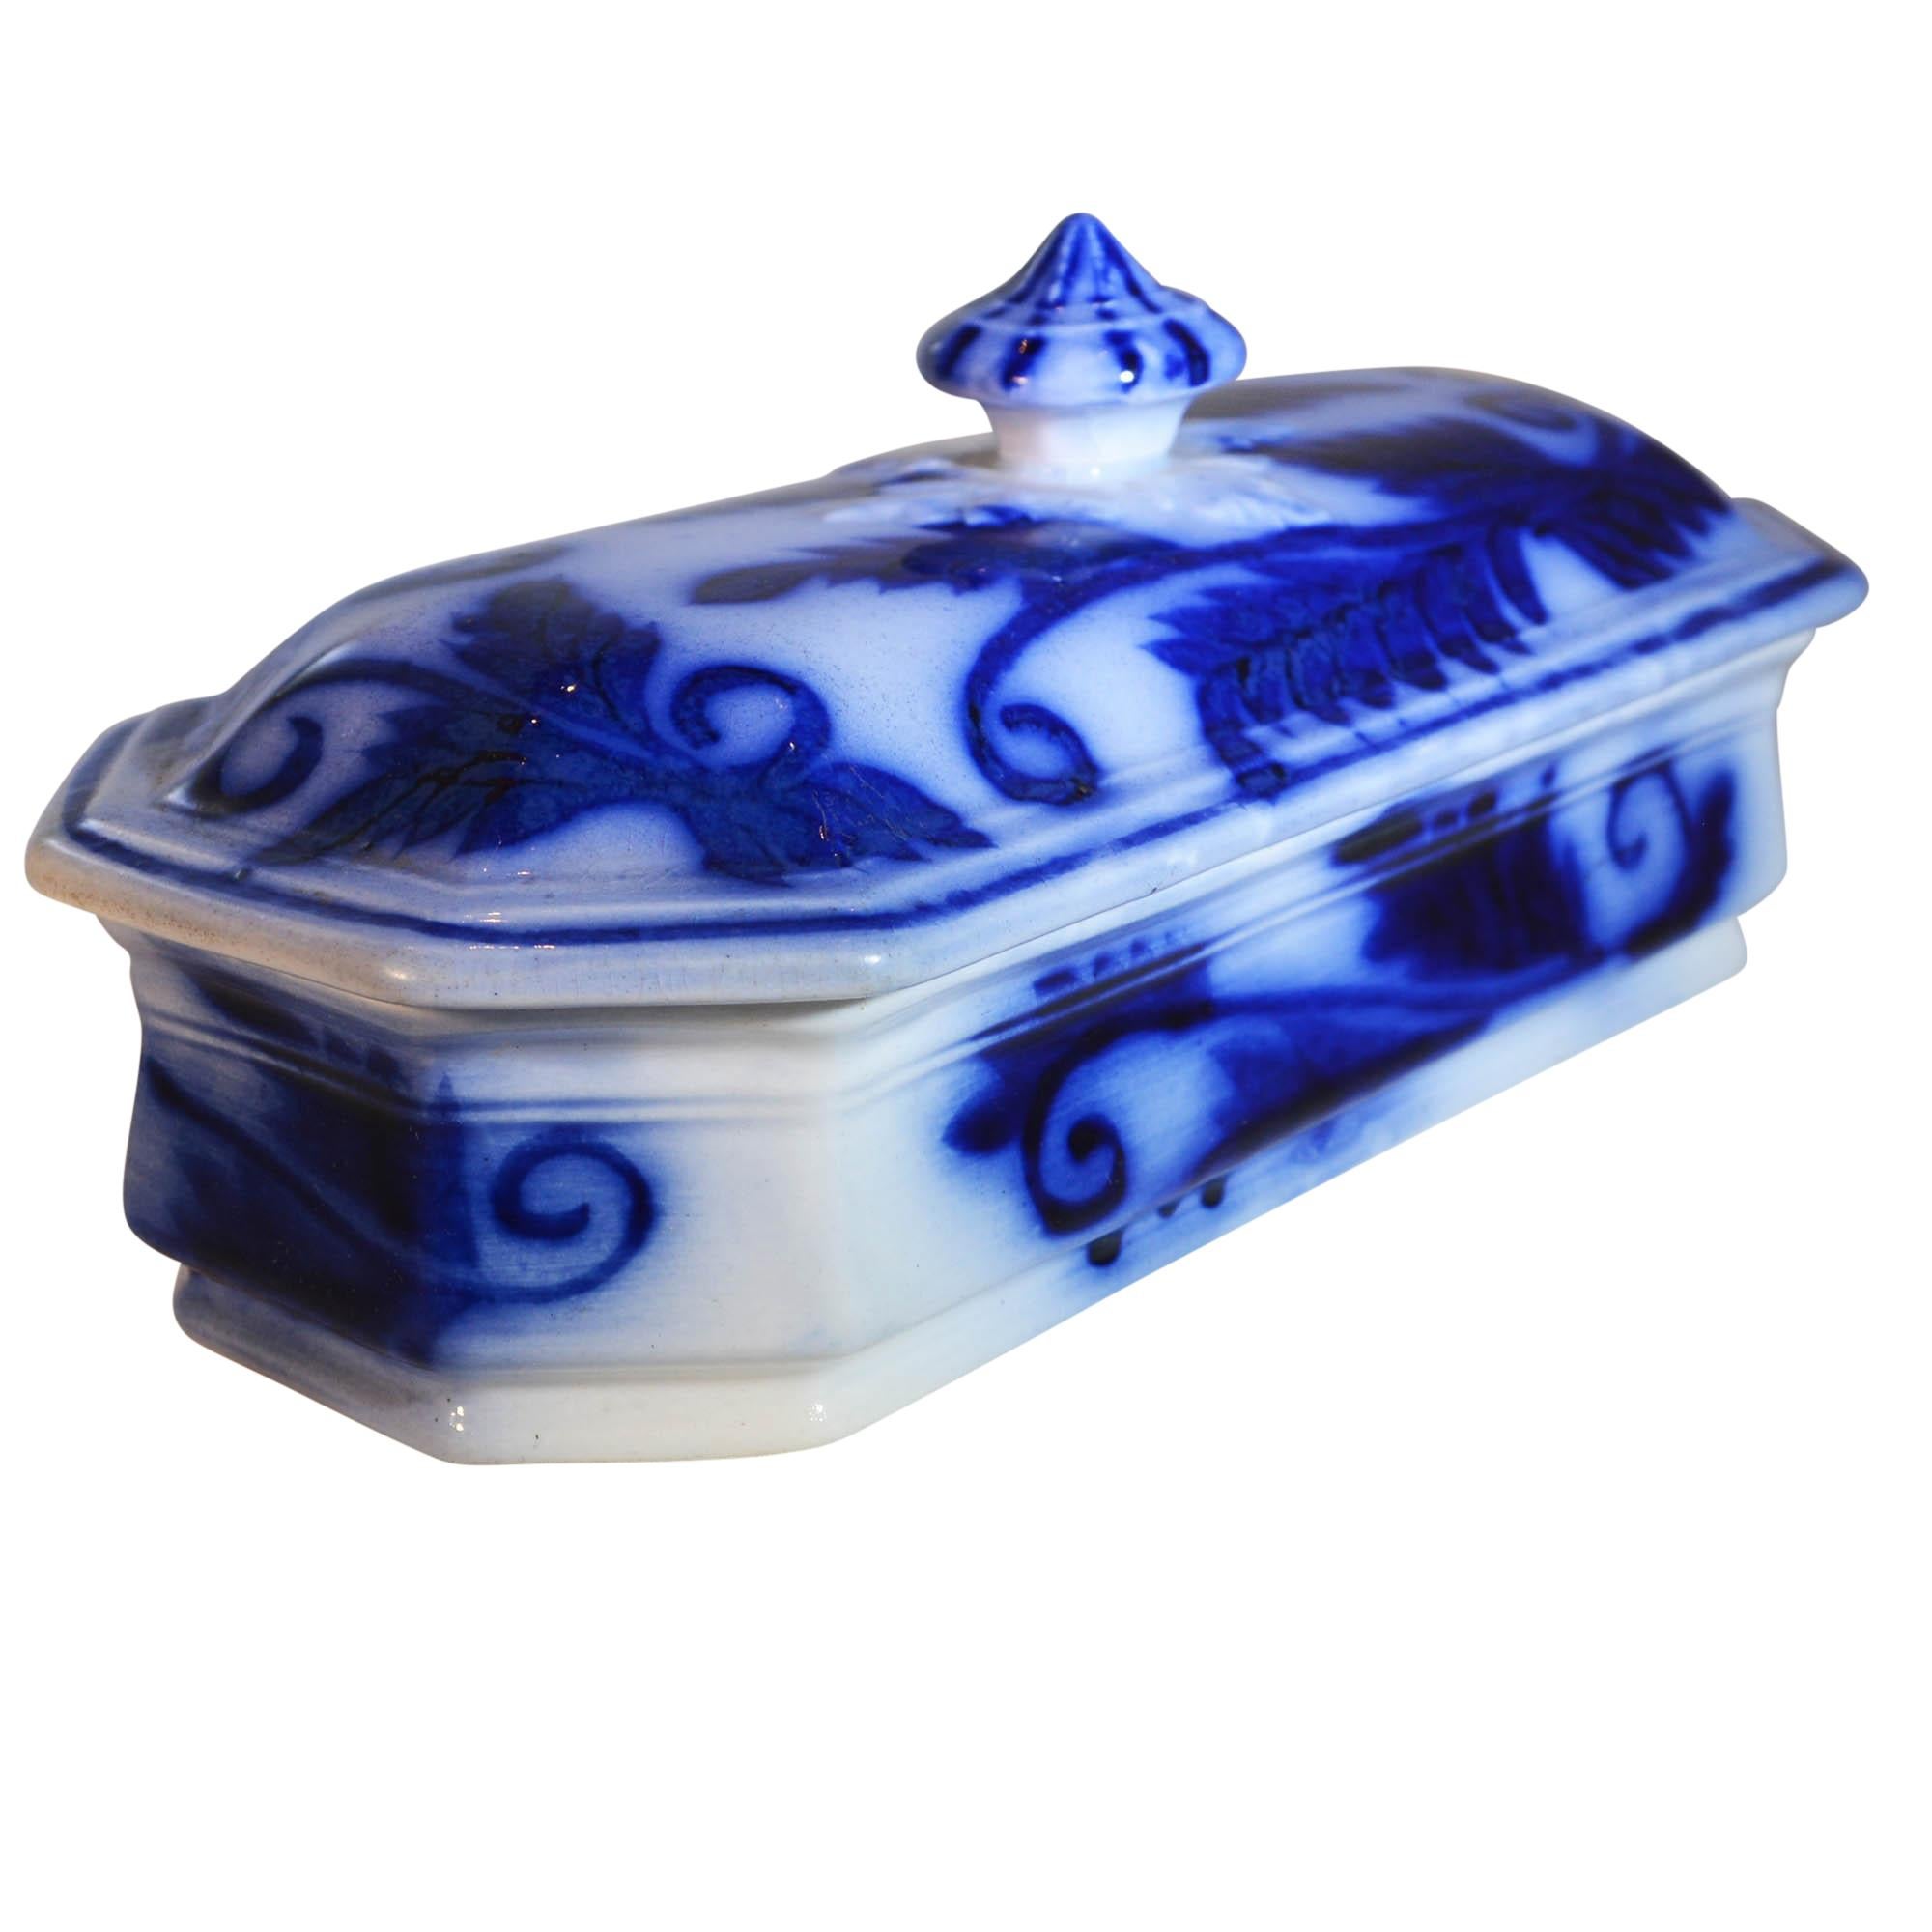 Beautiful blue flow toothbrush holder is highly decorated with the design. The lid has a raised dimensional design surrounding the lift knob which makes this toothbrush holder a rare find. The lid's knob is decorated as well. This type of piece is